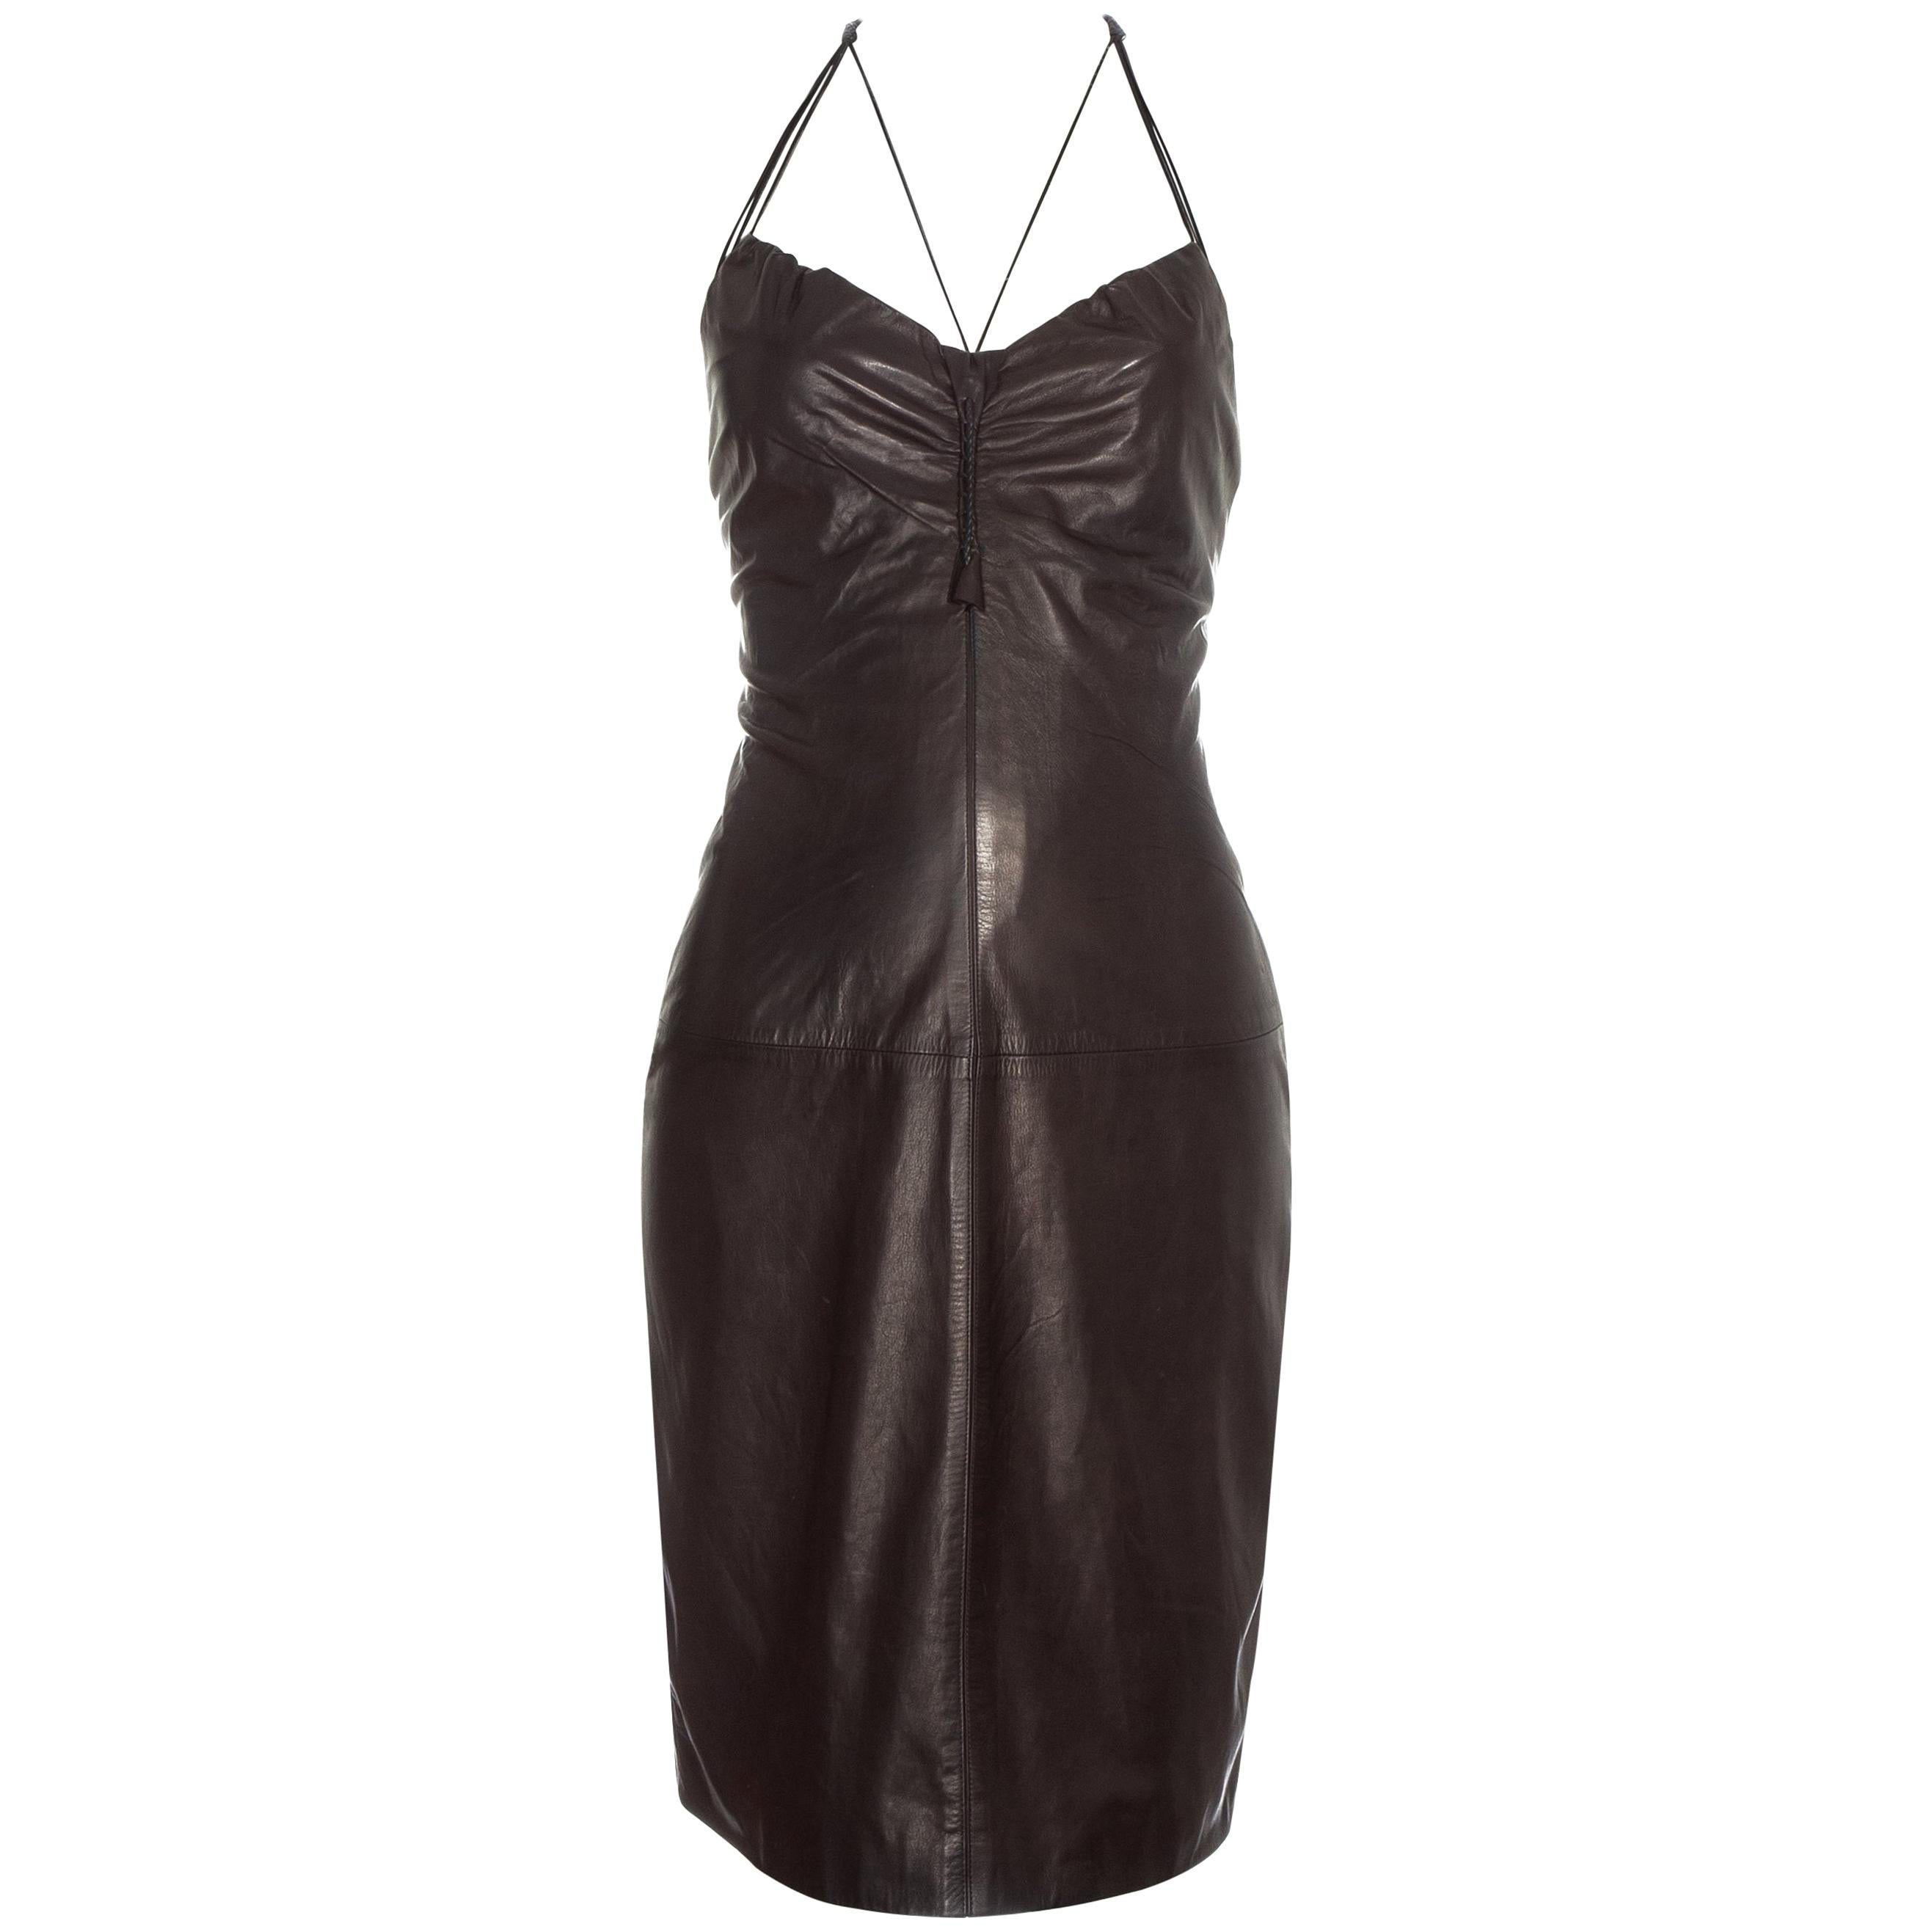 Gucci by Tom Ford brown leather halter neck dress, ss 2003